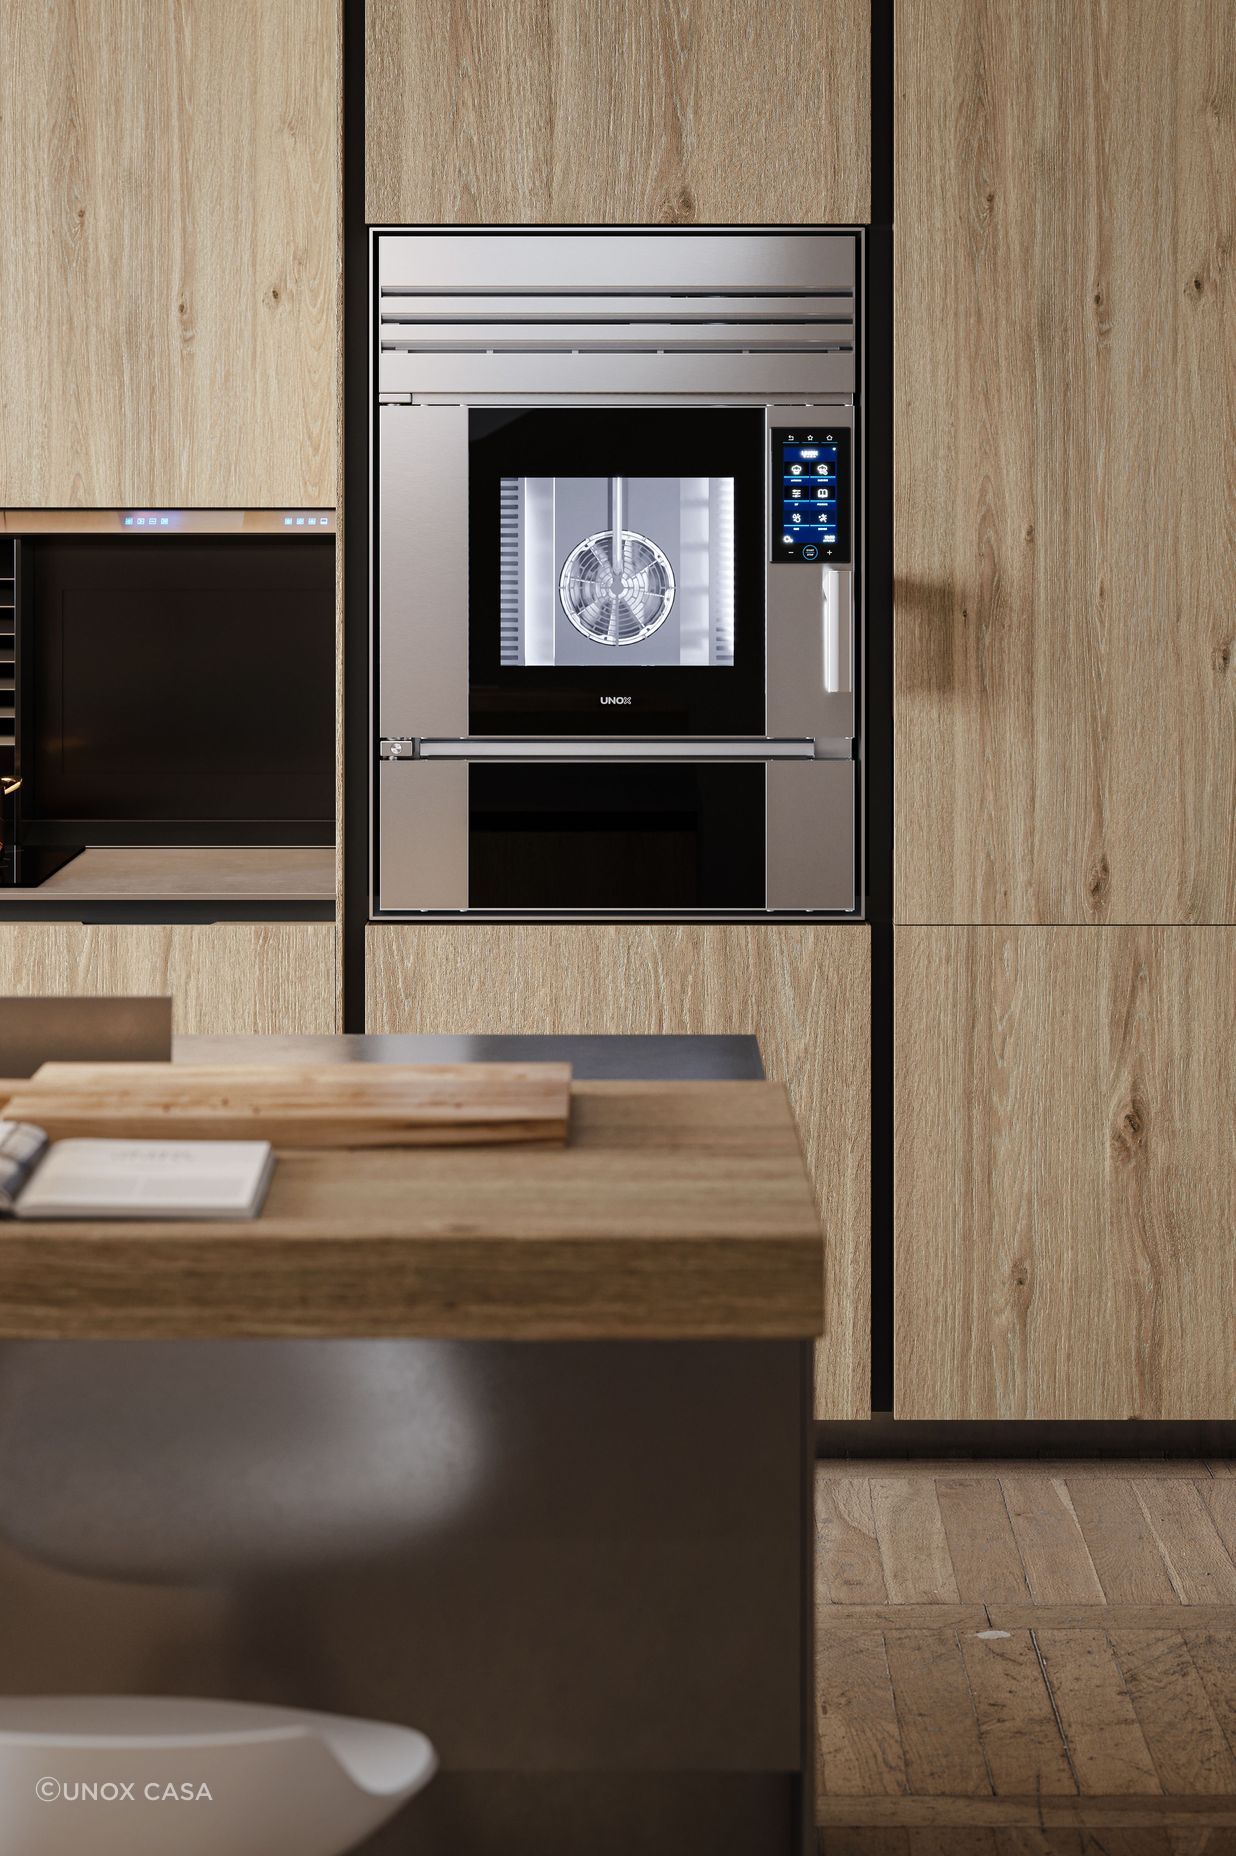 With the residential customer looking for kitchen appliances that offer both luxury aesthetics and performance, Unox Casa needed to reimagine the oven's design for this new market.